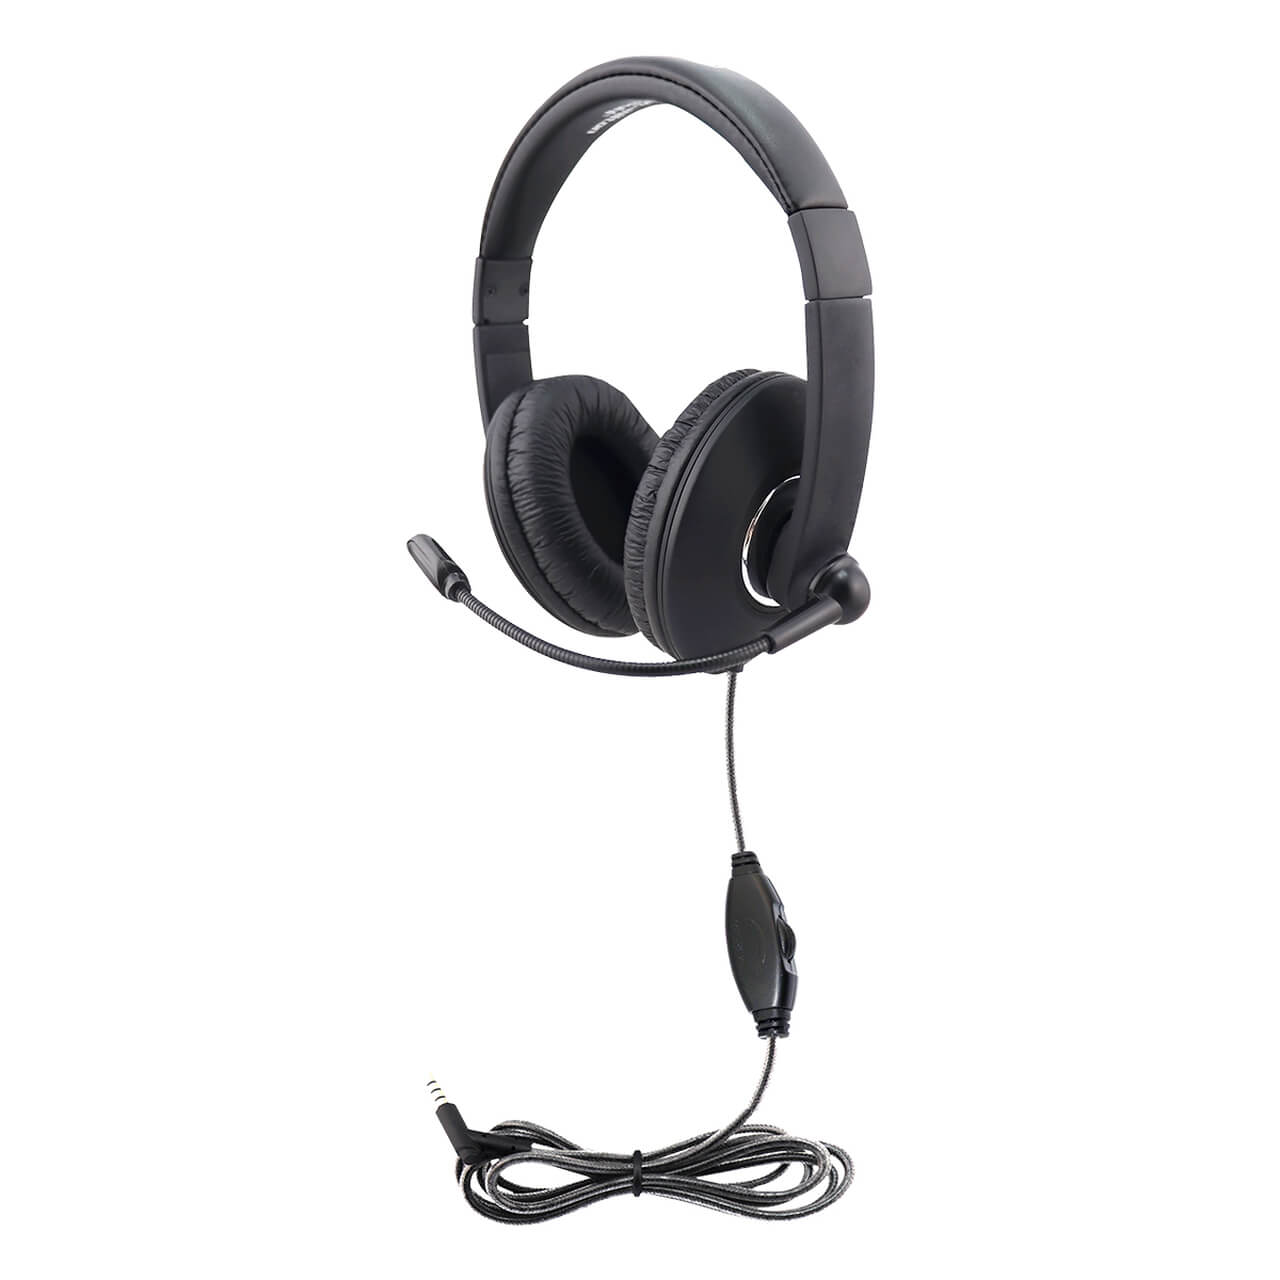 Smart-Trek Mini Headset with In-Line Volume Control and TRRS Plug - Learning Headphones